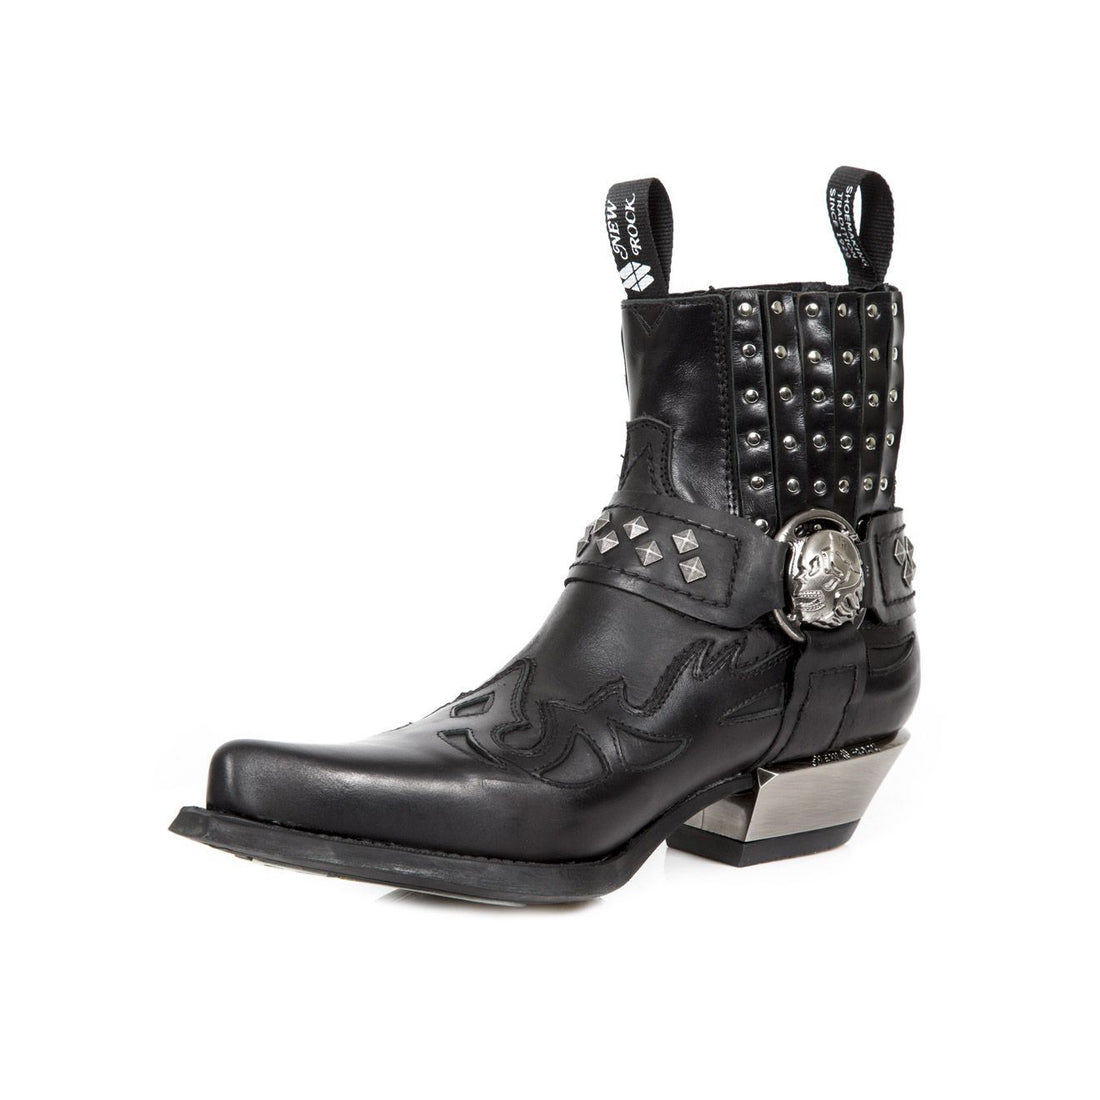 New Rock Studded Black Leather Western Biker Boots-7950-S1 - Upperclass Fashions 